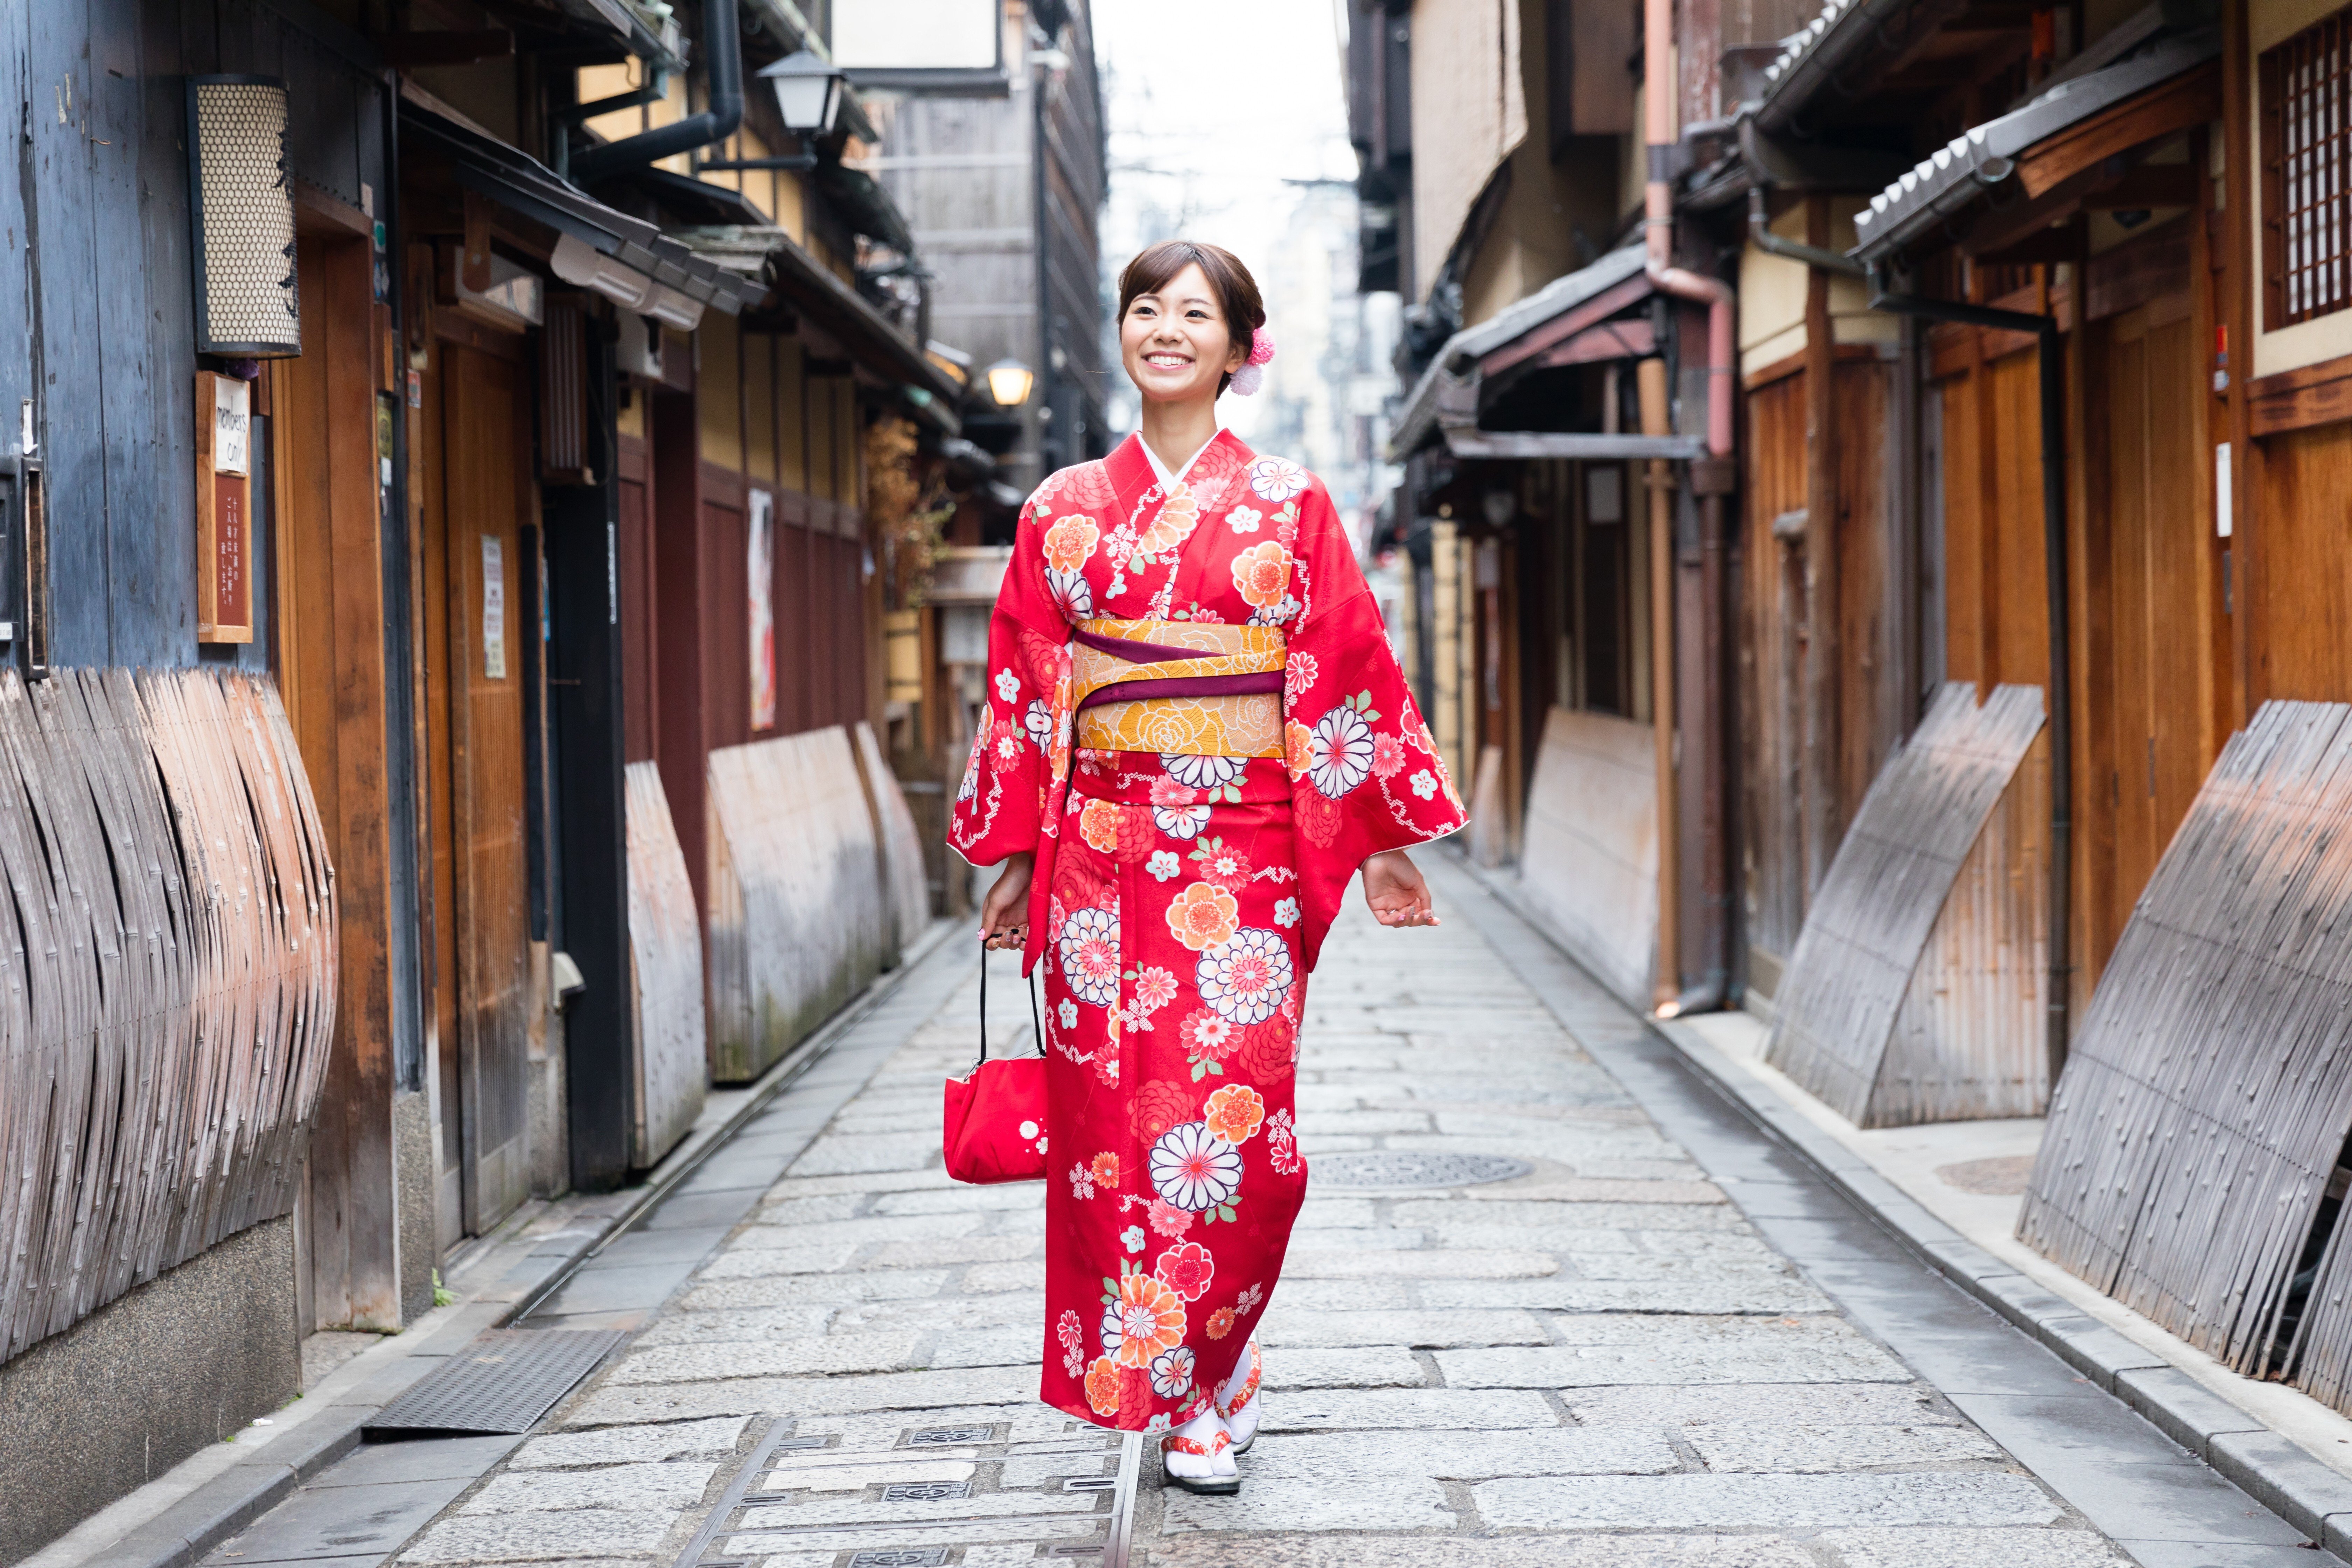 The modern kimono was created around the 1600s and today is mainly worn on special occasions.